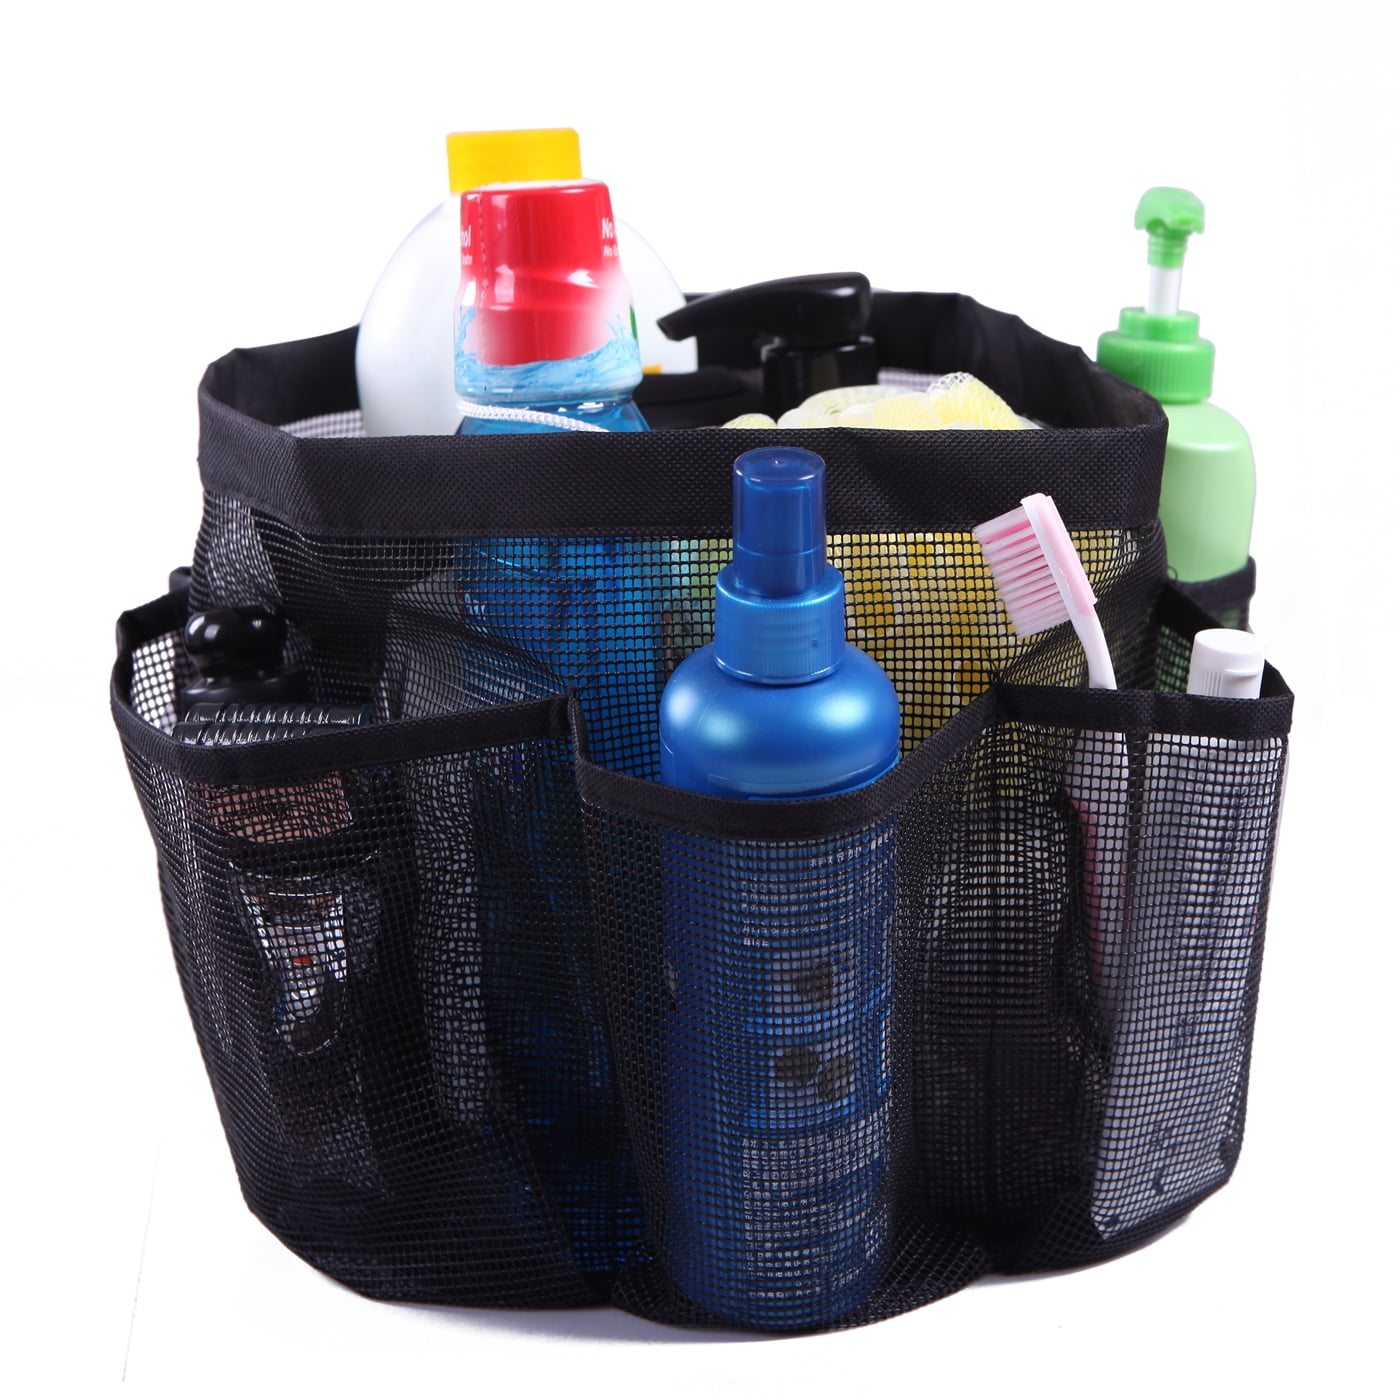 Black Quick Dry Shower Tote Bag Oxford Hanging Toiletry and Bath Organizer with 8 Storage Compartments for Shampoo Soap and Other Bathroom Accessories VousNous Mesh Shower Caddy Conditioner